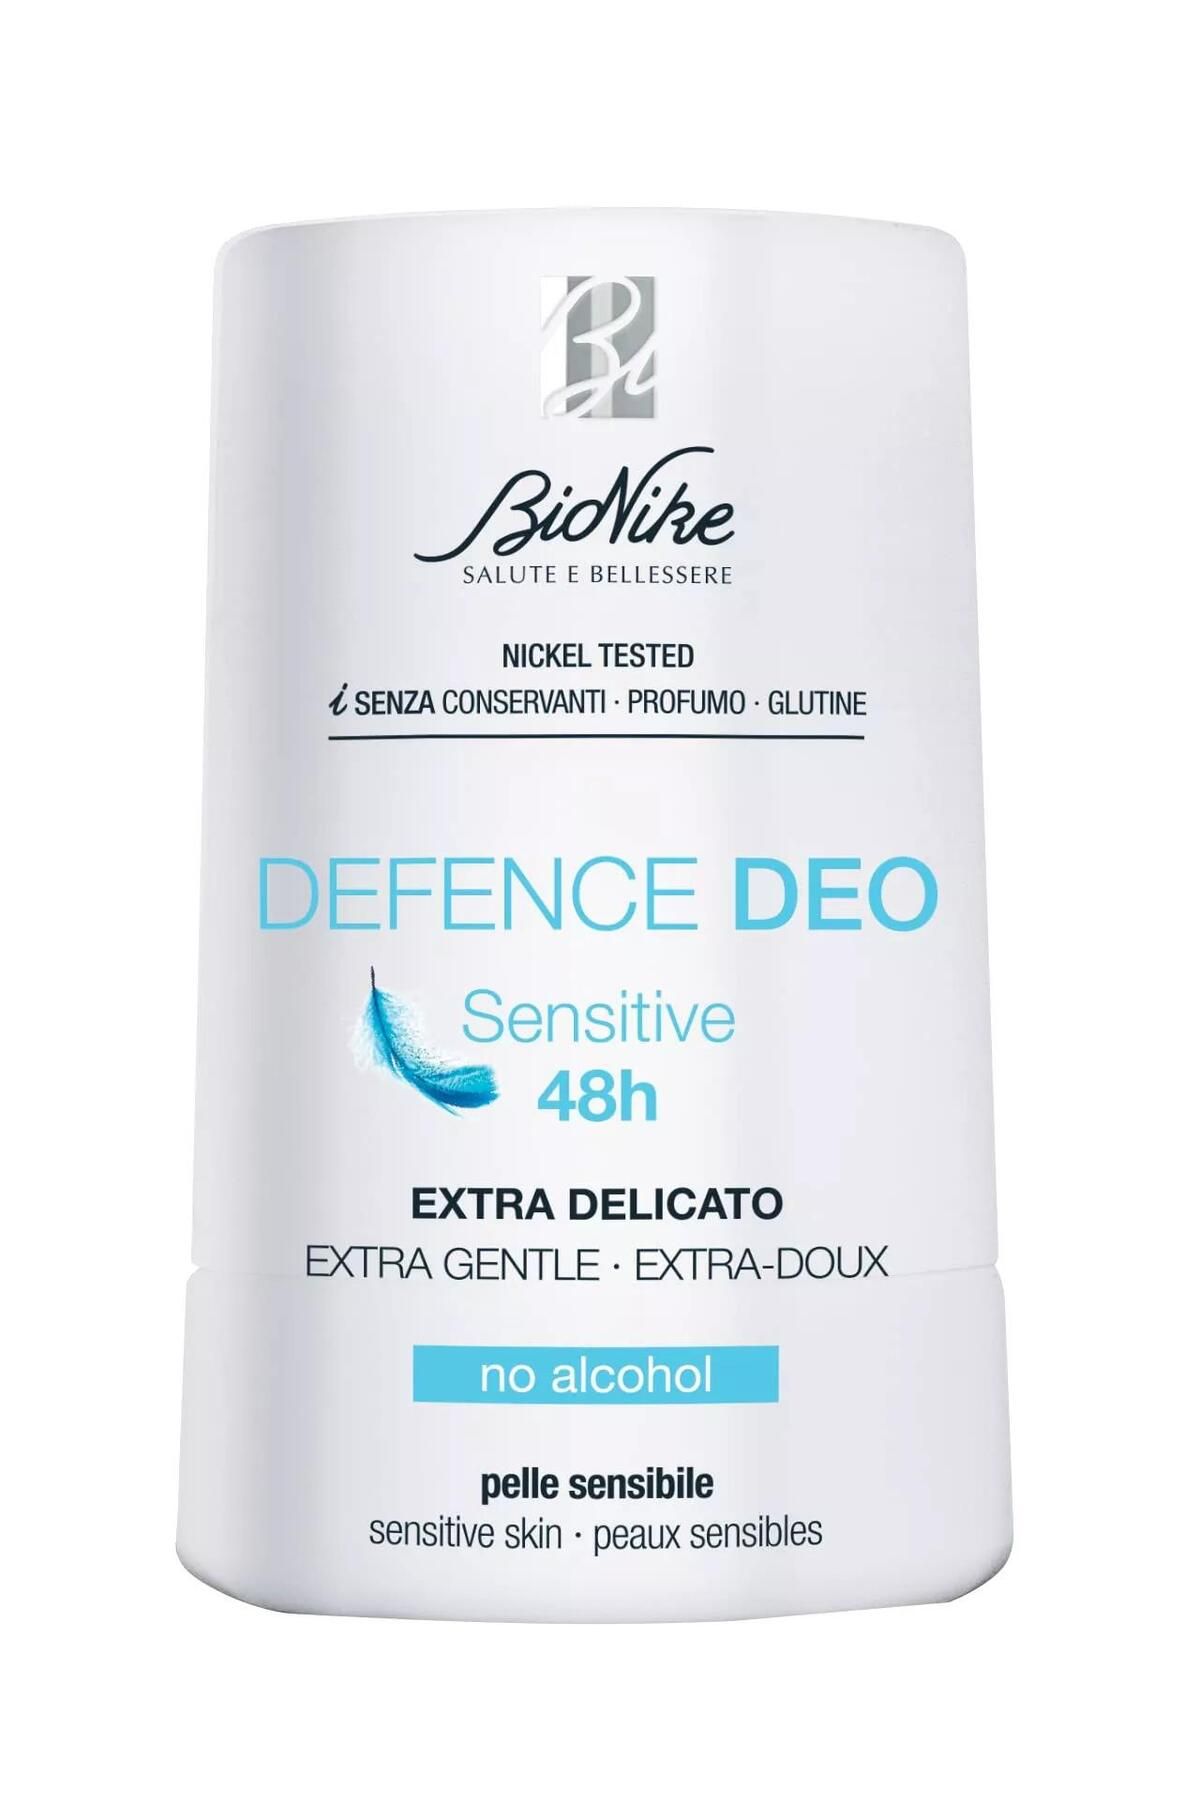 BioNike Defence Deo Sensitive 48h Latte Roll-on 50 ml 10230109